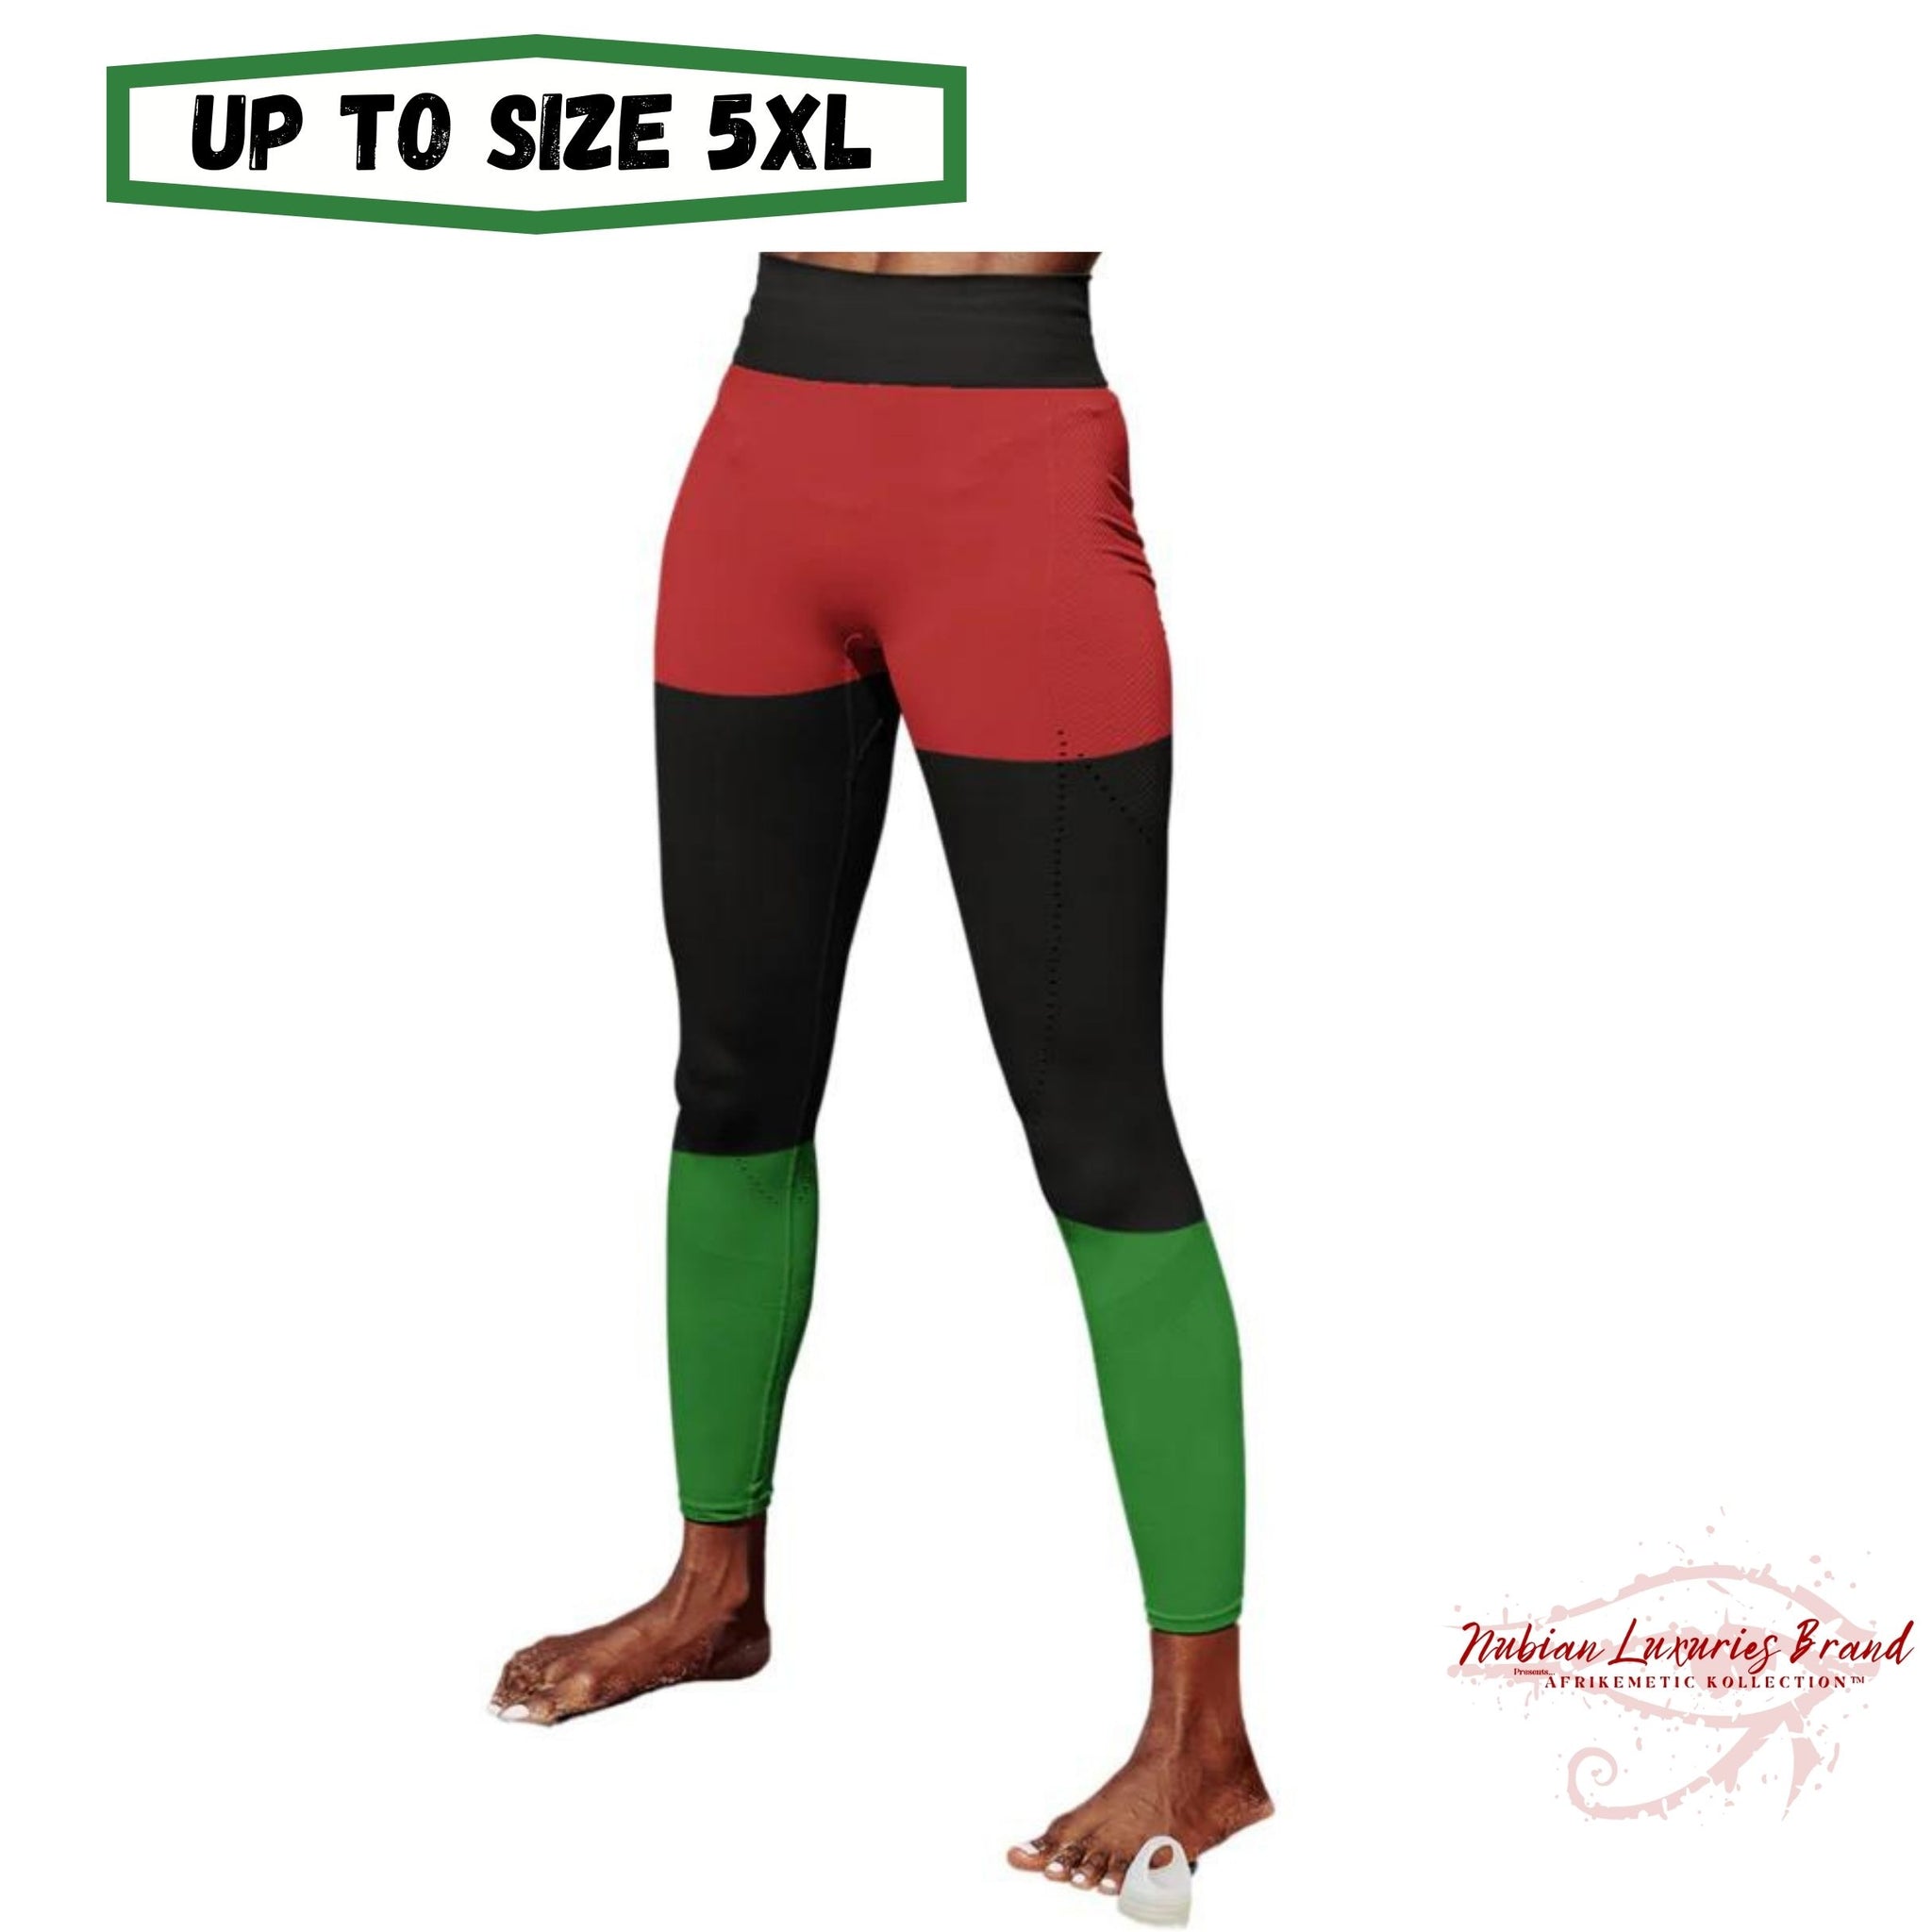 RED BLACK and GREEN Leggings